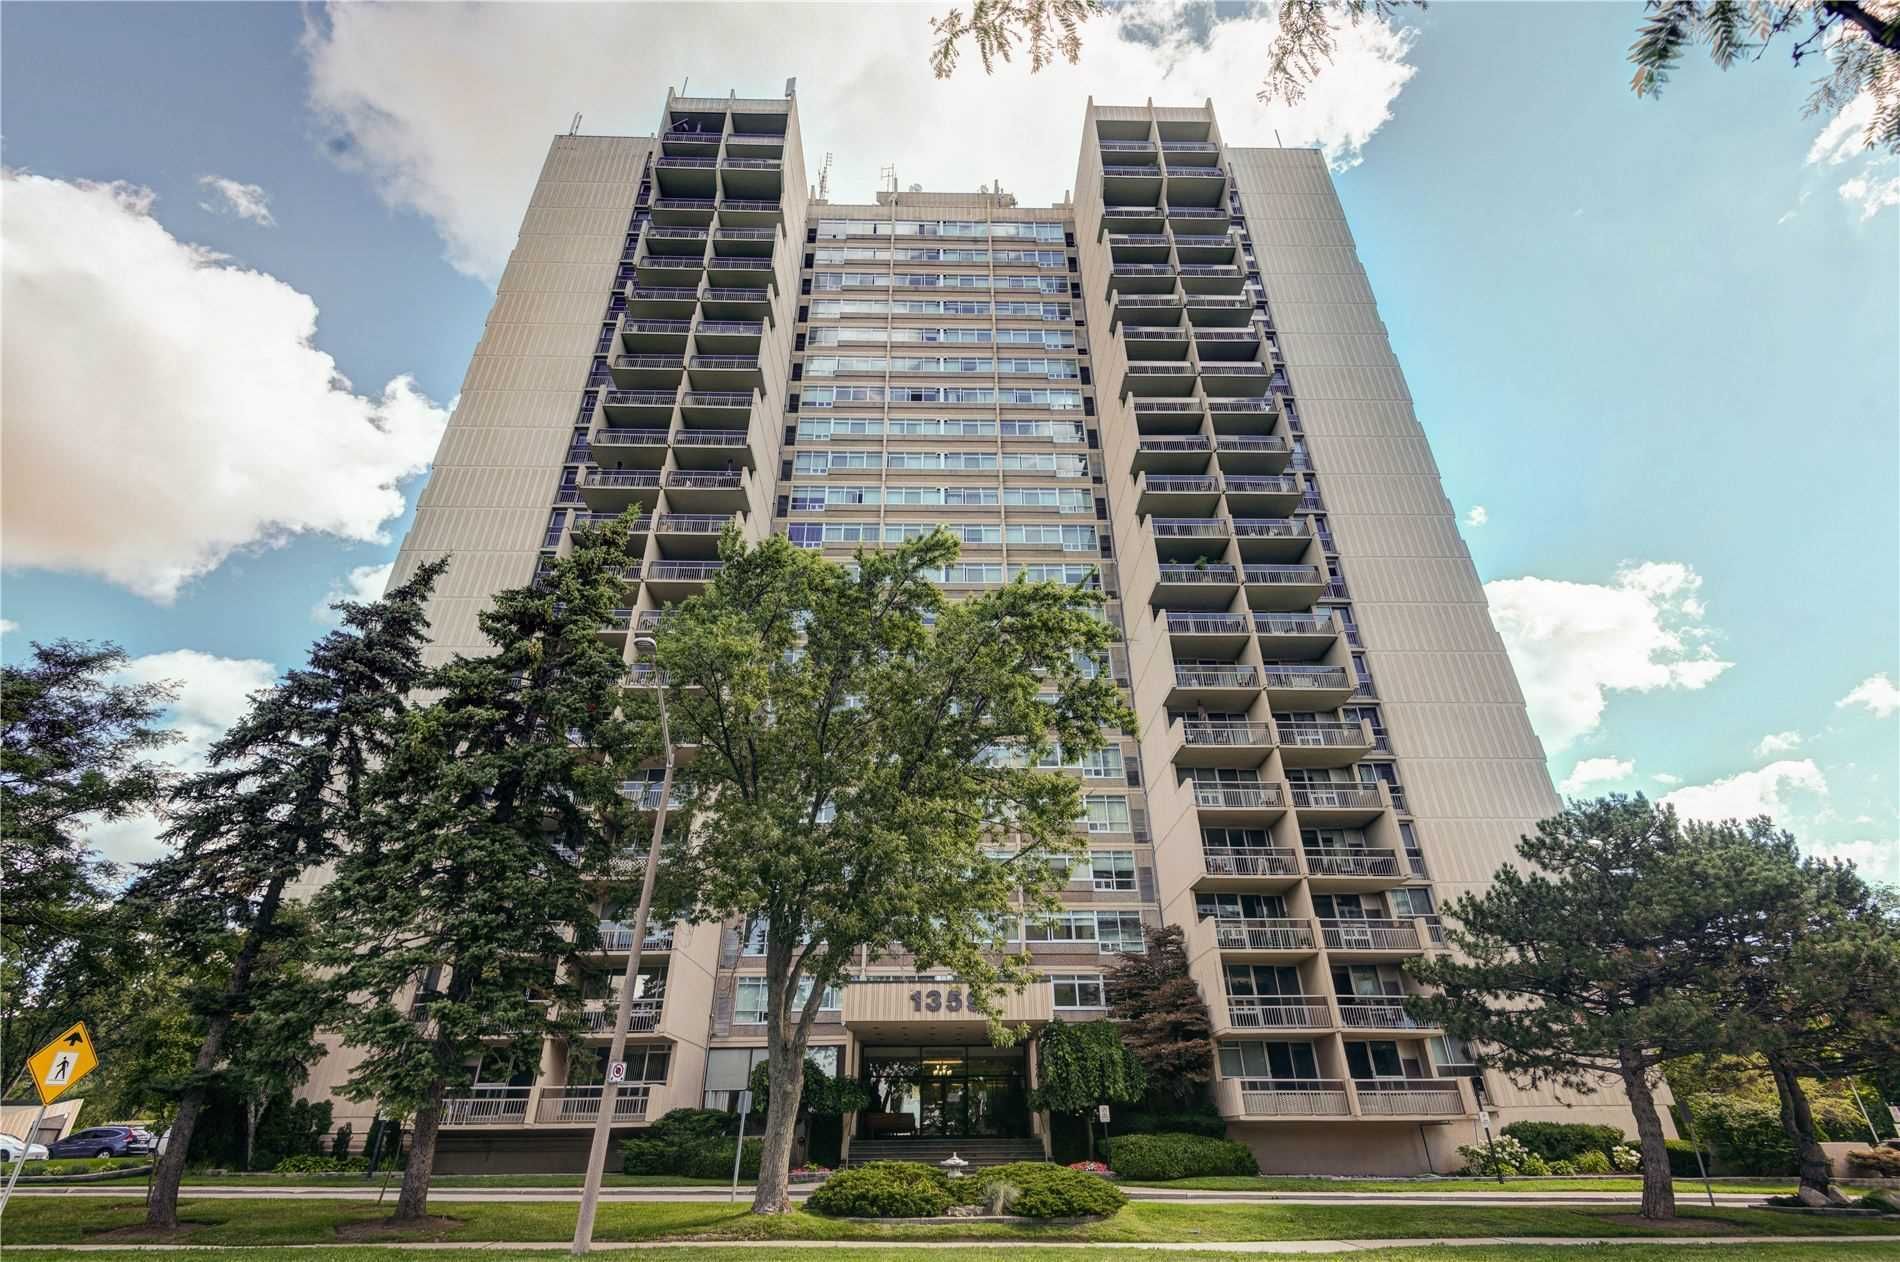 1359 White Oaks Blvd. This condo at The Oaks Condos is located in  Oakville, Toronto - image #2 of 2 by Strata.ca